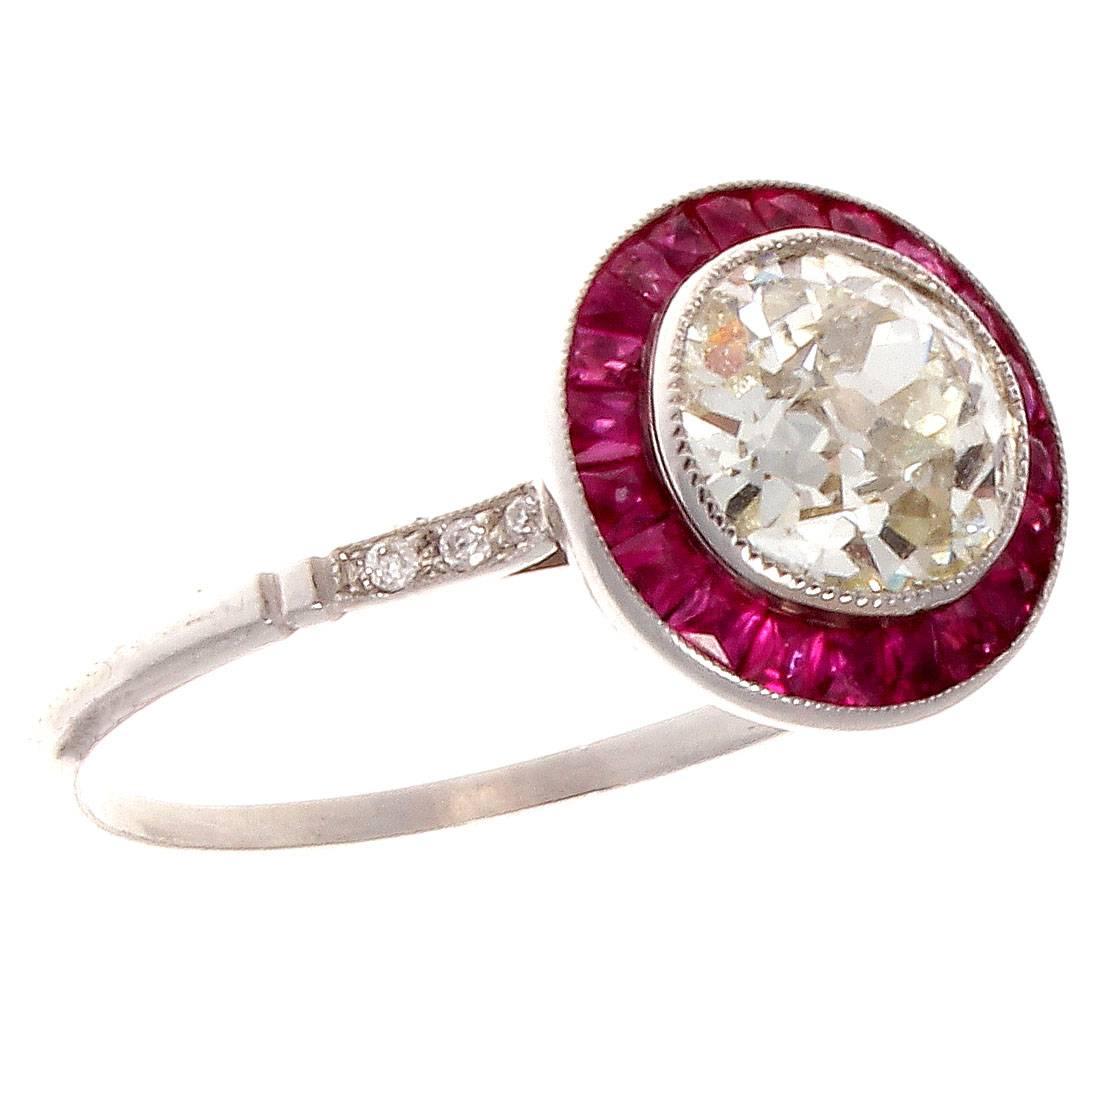 The 19th century creation that never goes out of style. This halo engagement ring features a 1.46 carat old European cut diamond that is L color, SI1 clarity perfectly surrounded by a halo of vibrant red rubies. Hand crafted in platinum.

Ring size